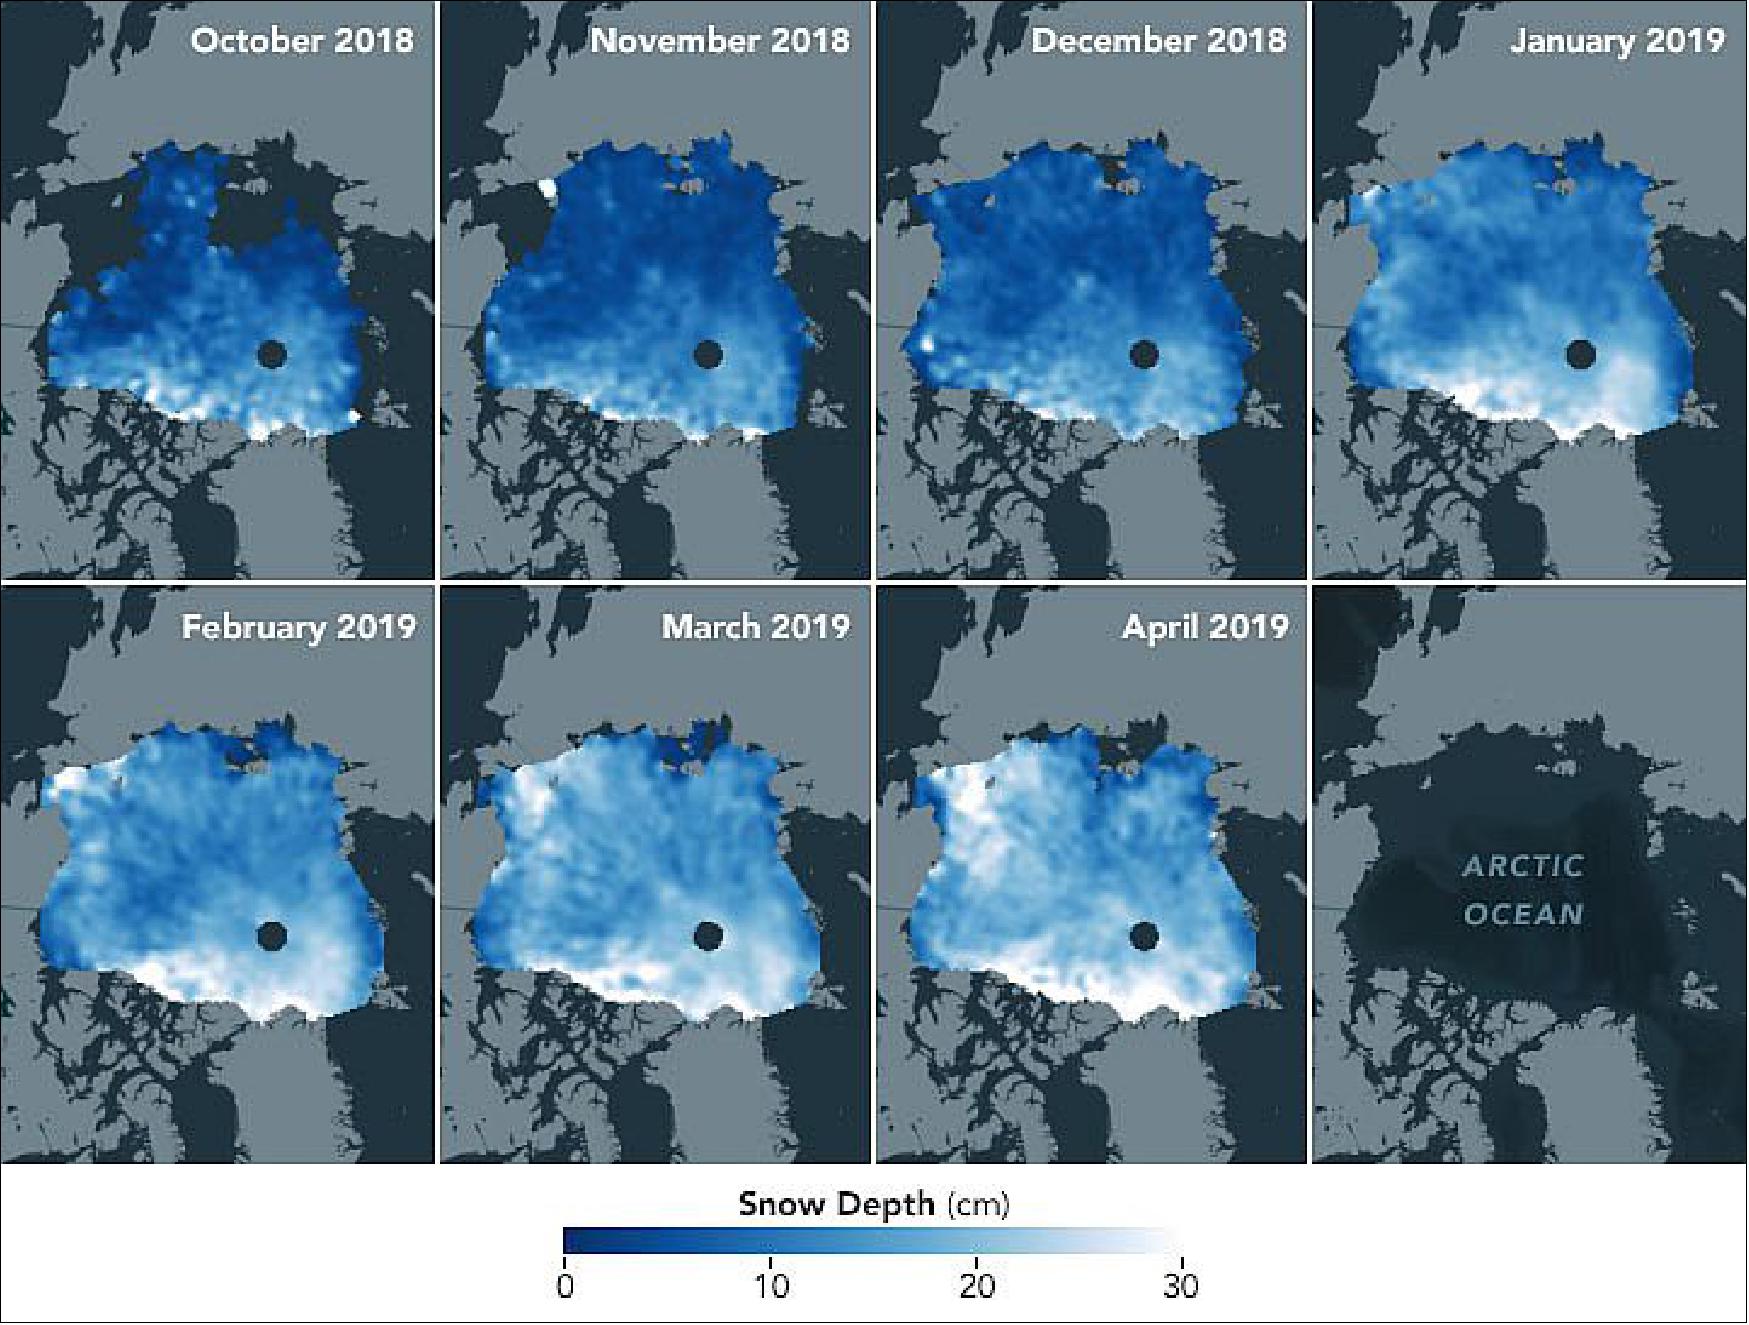 Figure 34: First-of-a-kind maps show how the depth of this insulating snow layer changes from month to month. The maps show snow depths across Arctic sea ice, averaged monthly from October 2018 through April 2019. Snow starts building up slowly in October, when newly formed ice has an average of about 5 cm (2 inches) of snow on it and multiyear ice has an average of 14 cm (5.5 inches). Snowfall picks up in December and January and reaches its maximum depth in April, when the relatively new ice has an average of 17 cm (6.7 in) of snow cover and the older ice has an average of 27 cm (10.6 inches), image credit: NASA Earth Observatory, images by Joshua Stevens, using data courtesy of Kwok, R., et al. (2020). Story by Kathryn Hansen, with reporting from Kate Ramsayer